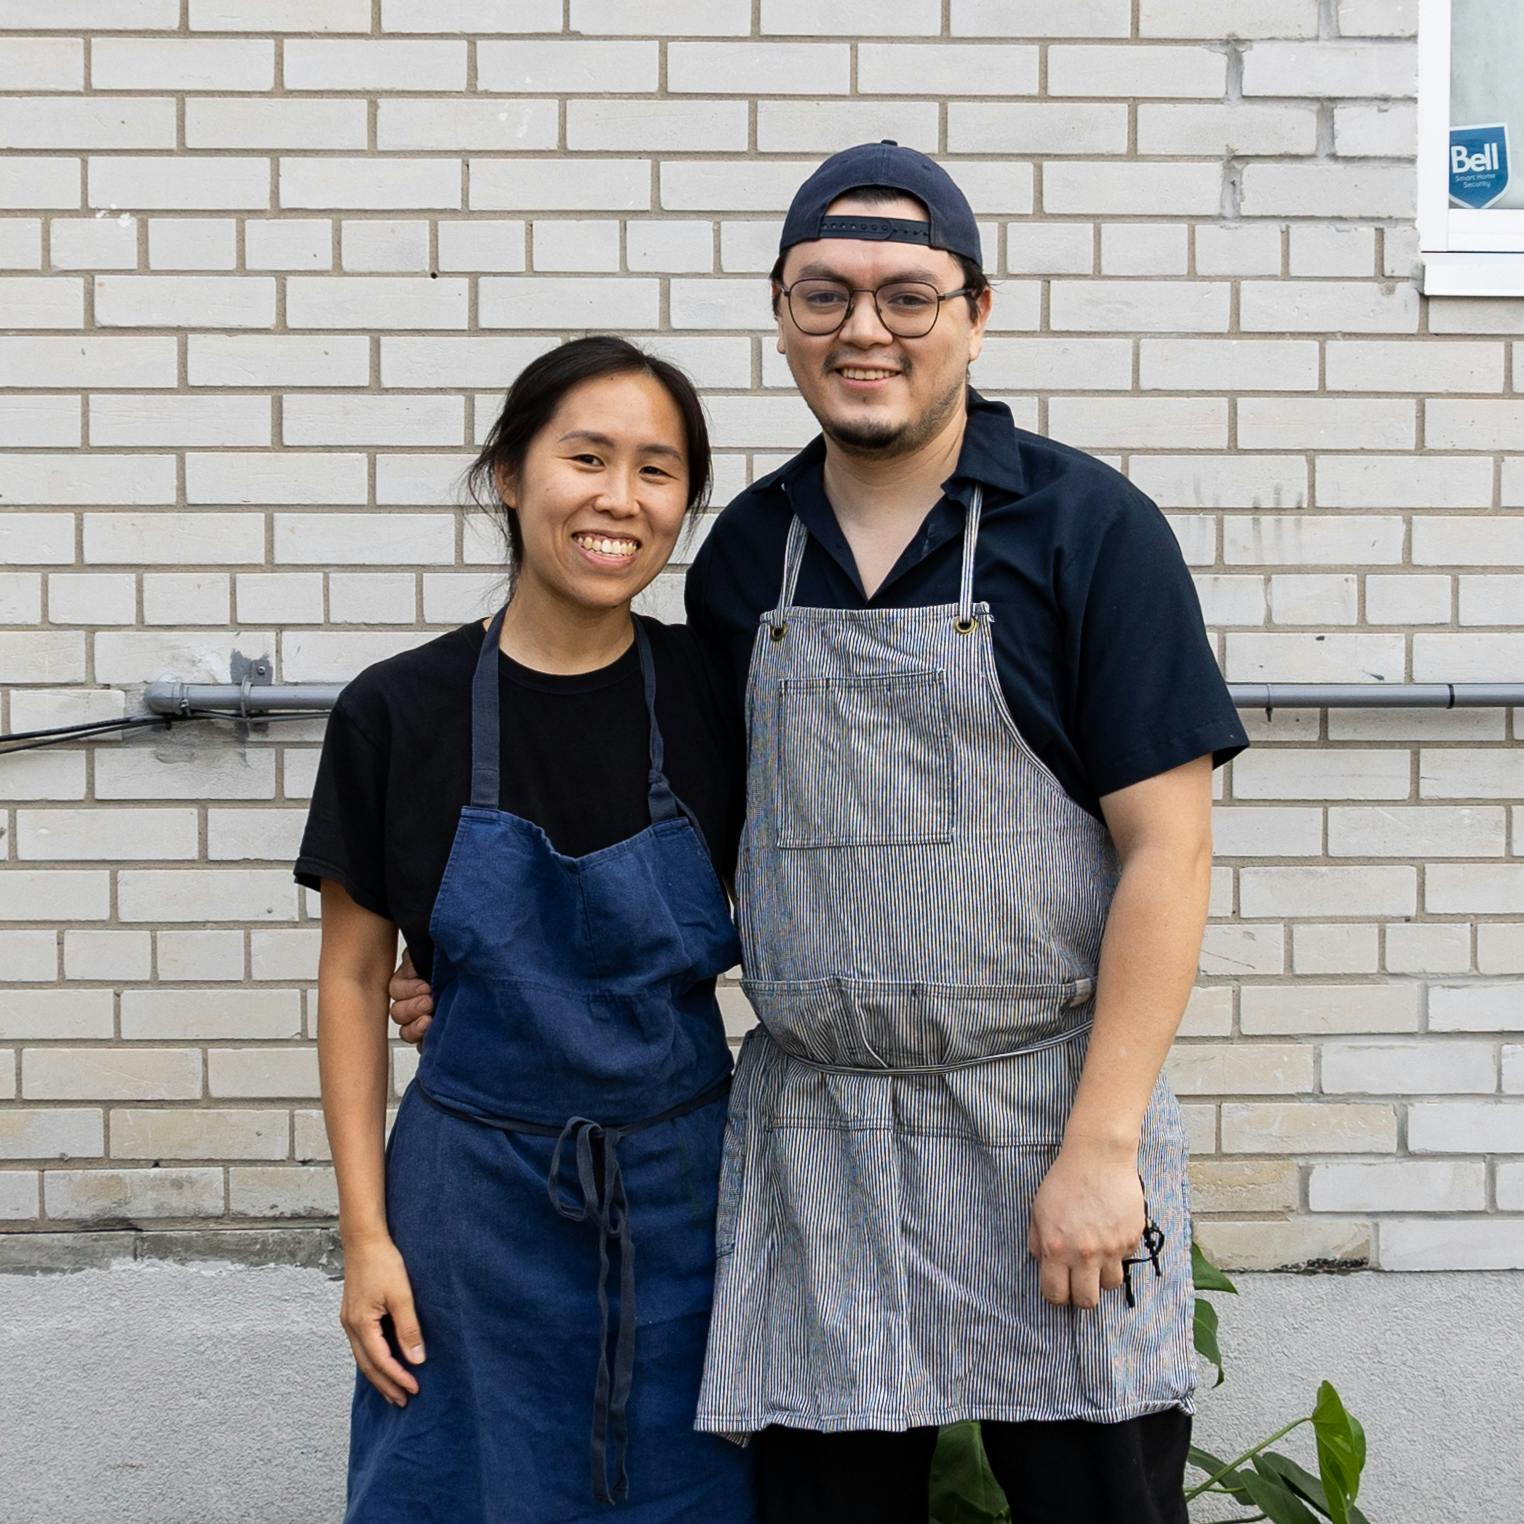 Chefs and Owners of ALMA+GIL Mandy Sou and Gerry Quintero